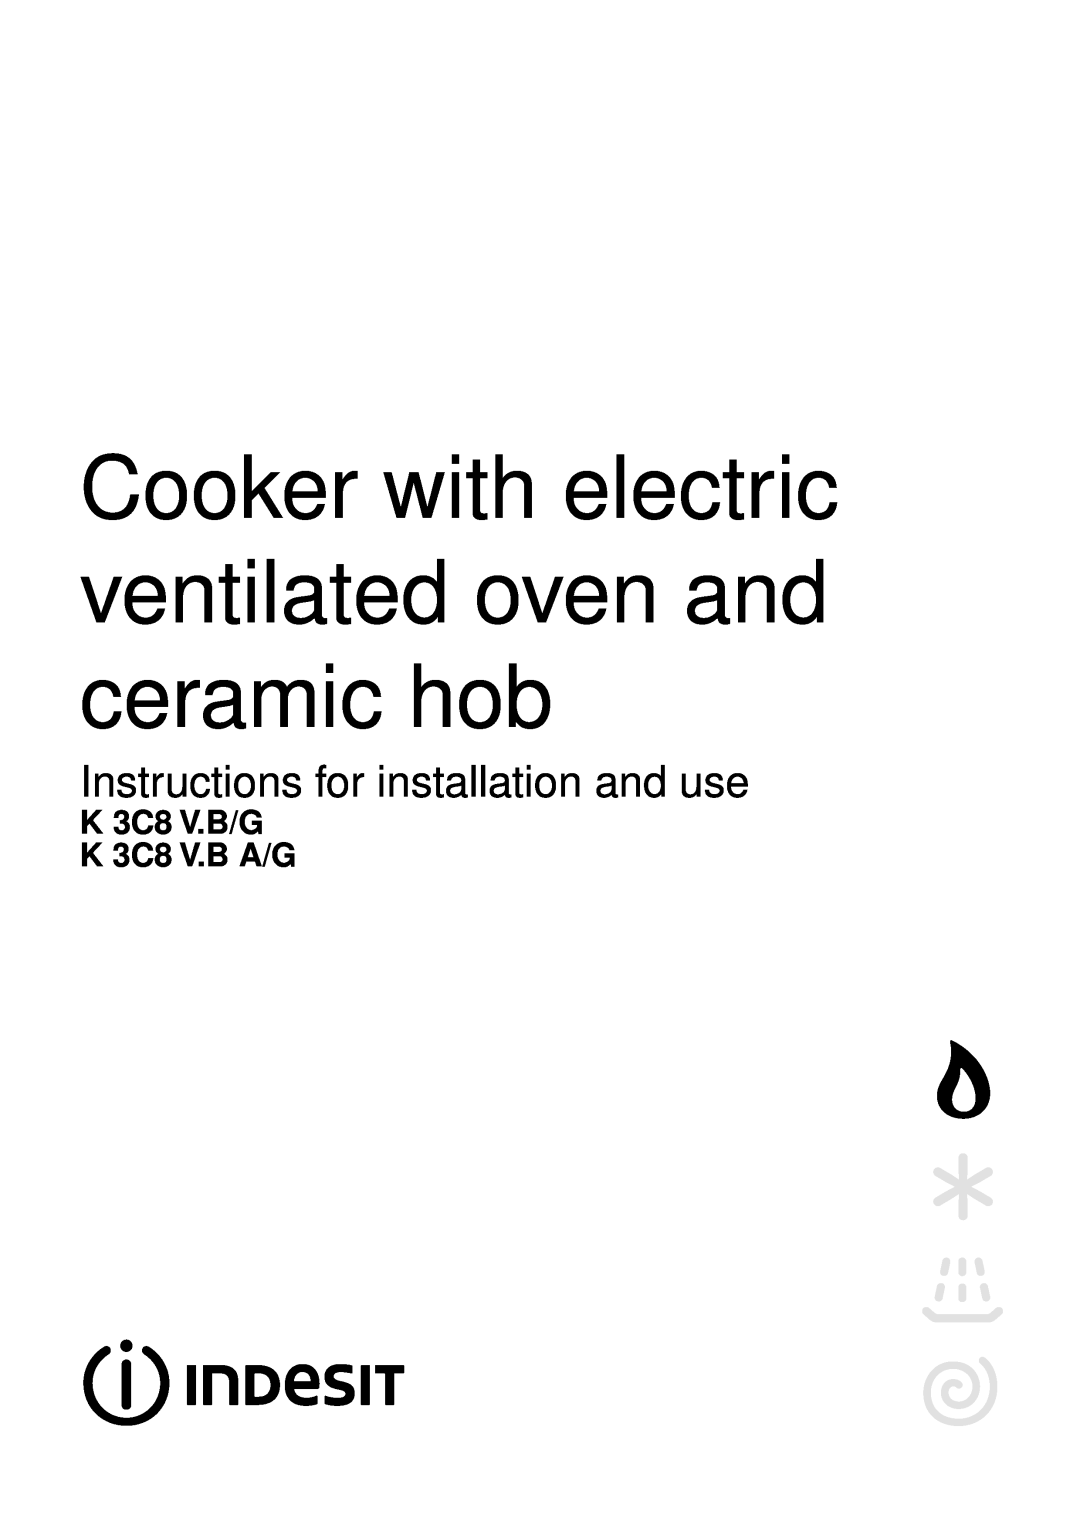 Indesit K 3C8 V.B A/G manual Cooker with electric ventilated oven and ceramic hob, Instructions for installation and use 